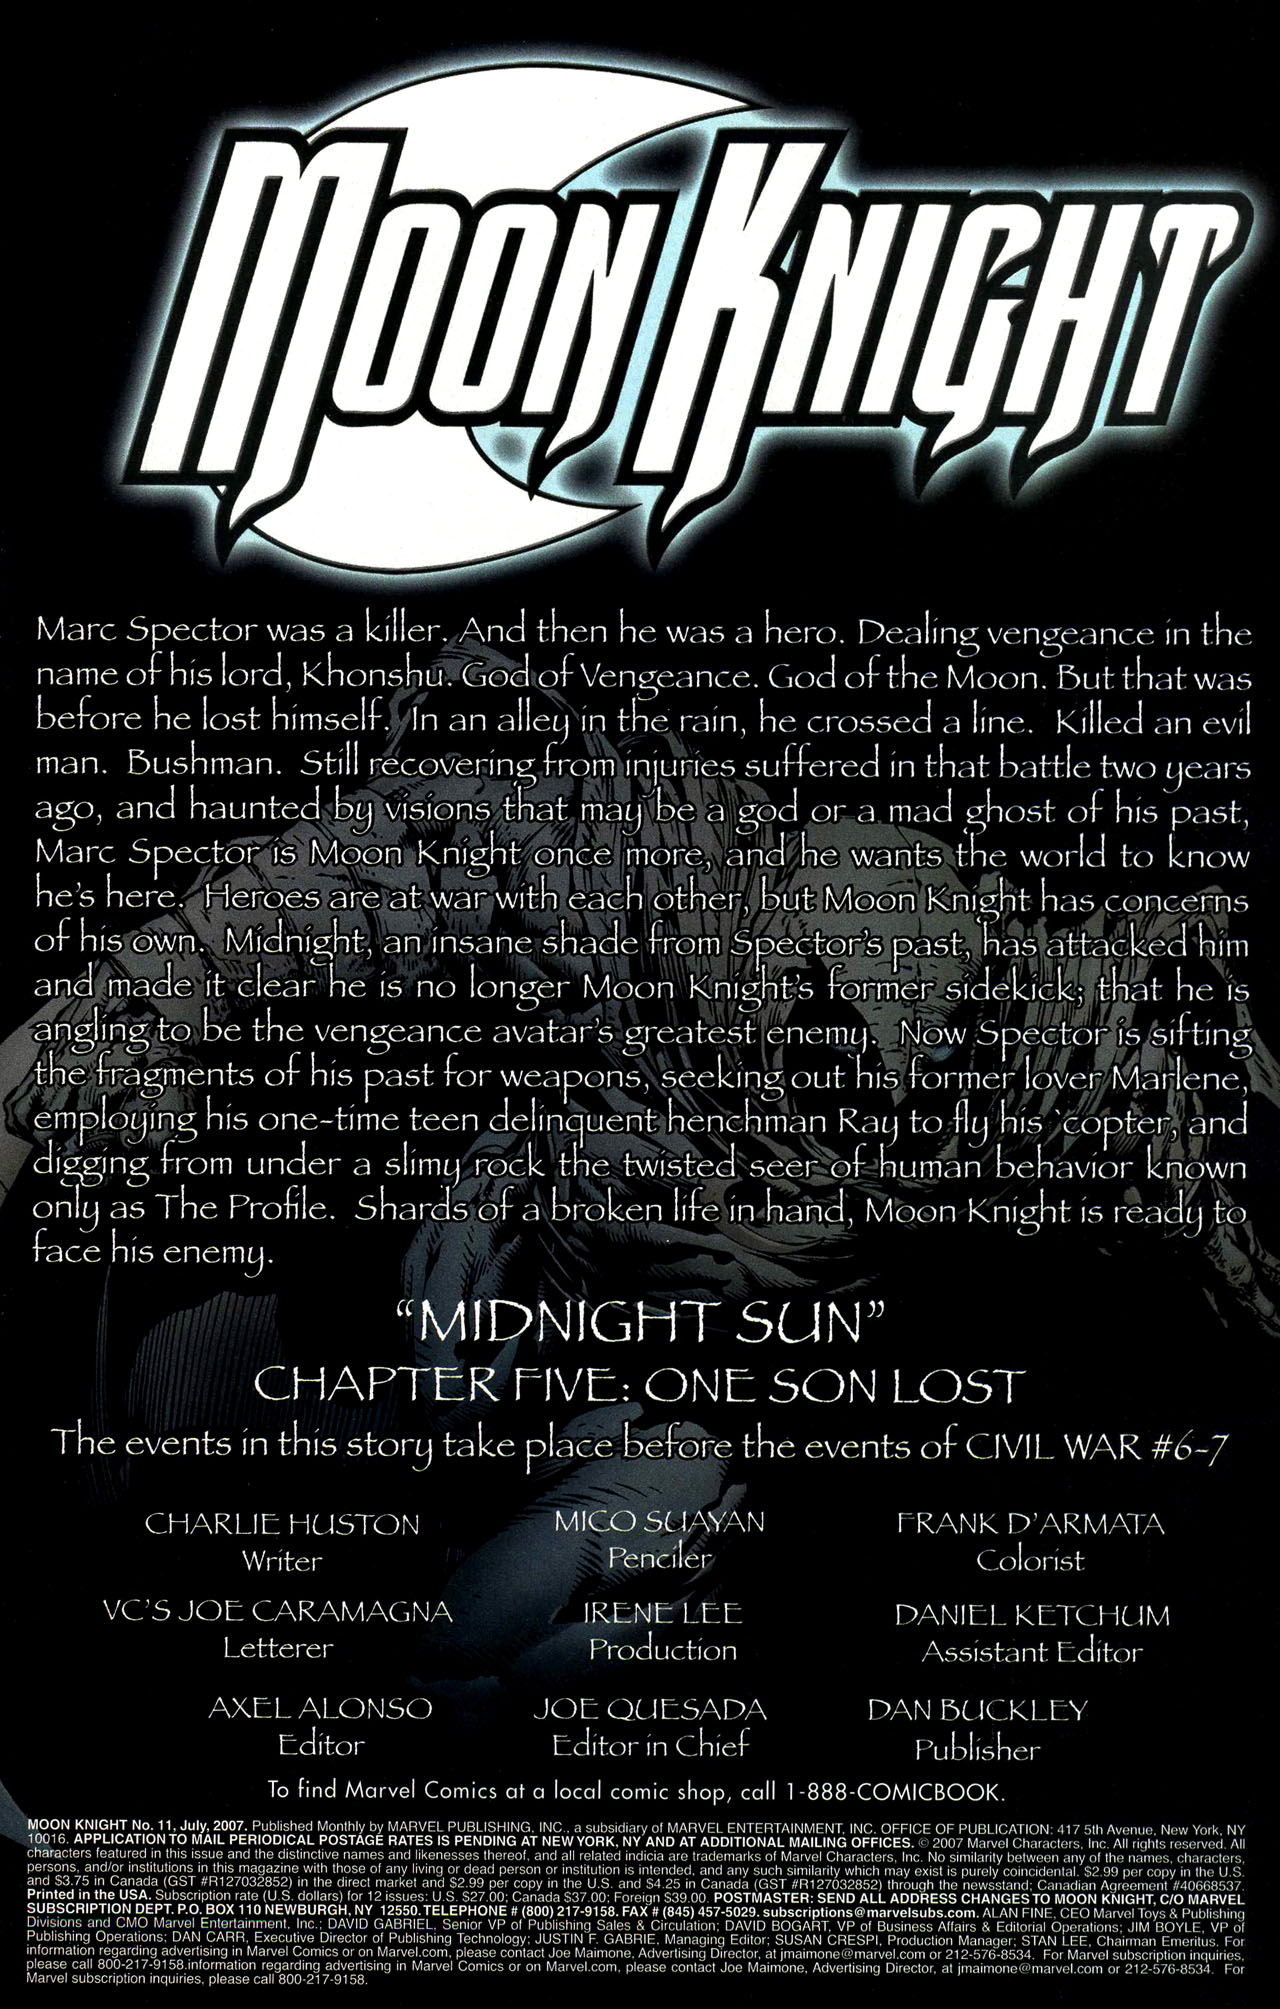  Moon Knight #11 - Midnight Sun, Chapter Five: One Son Lost